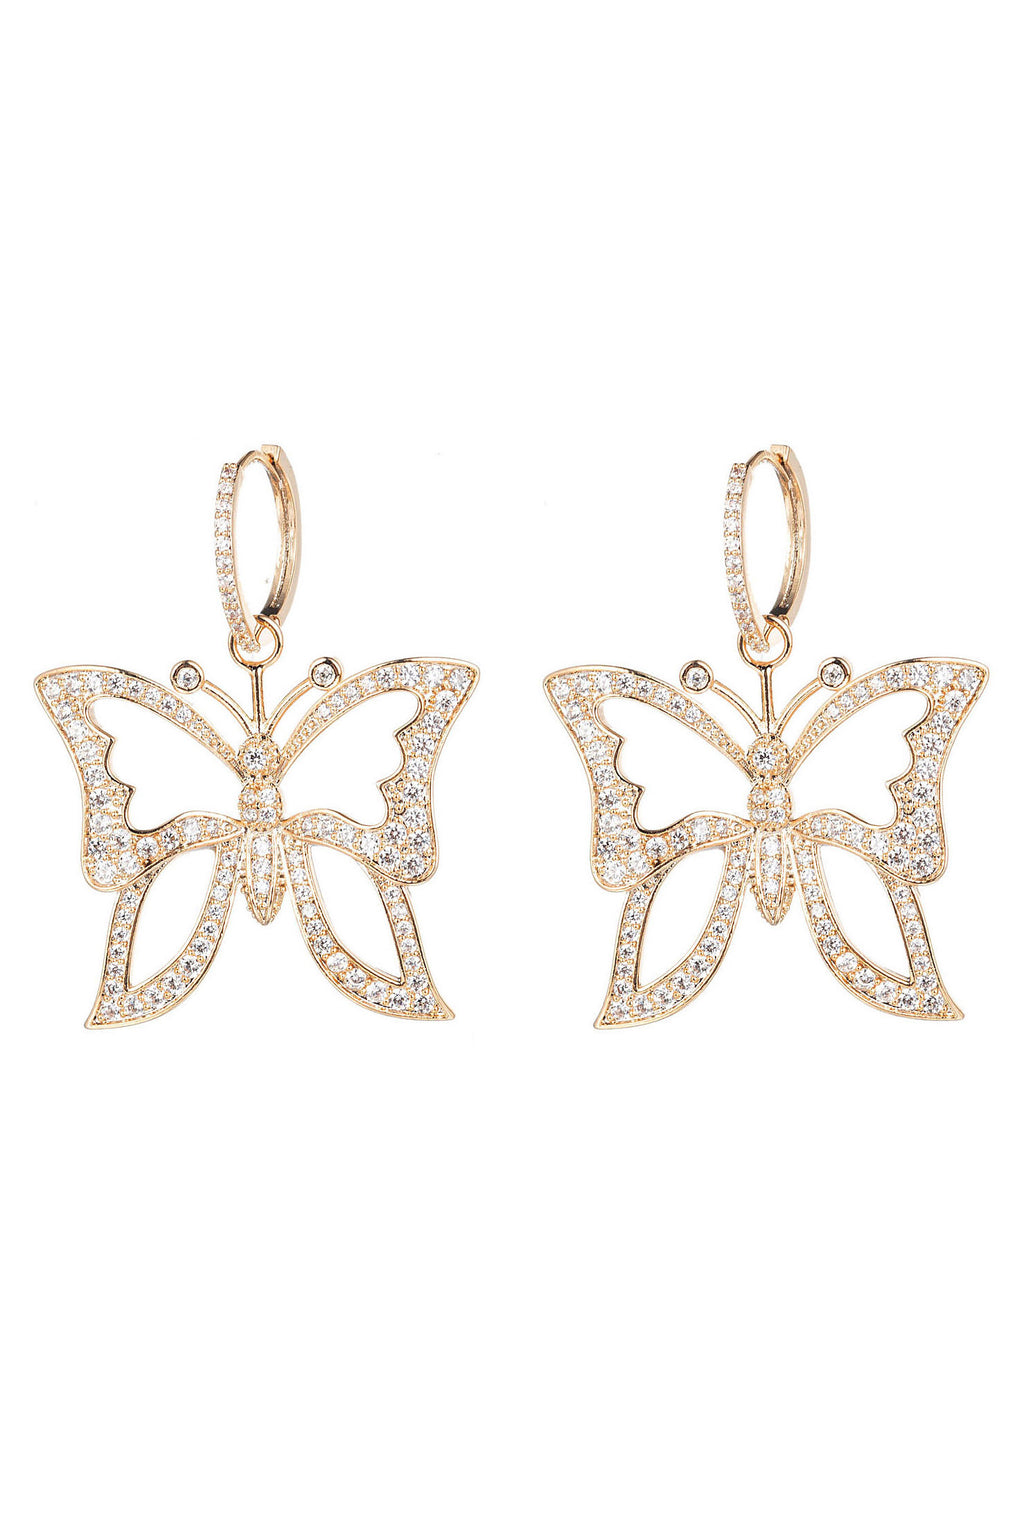 Gold brass butterfly dangle earrings studded with CZ crystals.